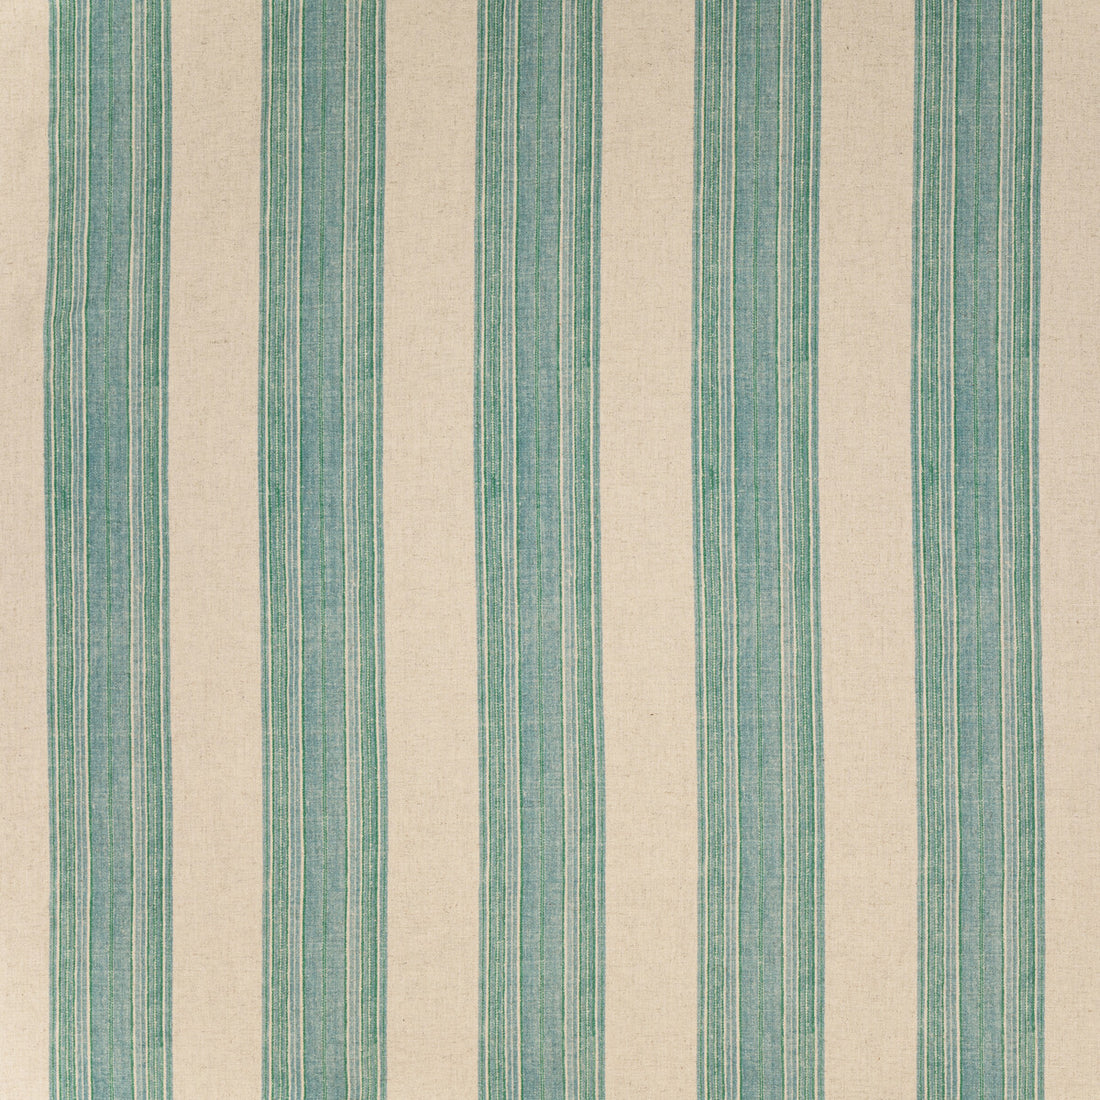 Mifflin Stripe fabric in aquamarine color - pattern BFC-3709.13.0 - by Lee Jofa in the Blithfield Eden collection